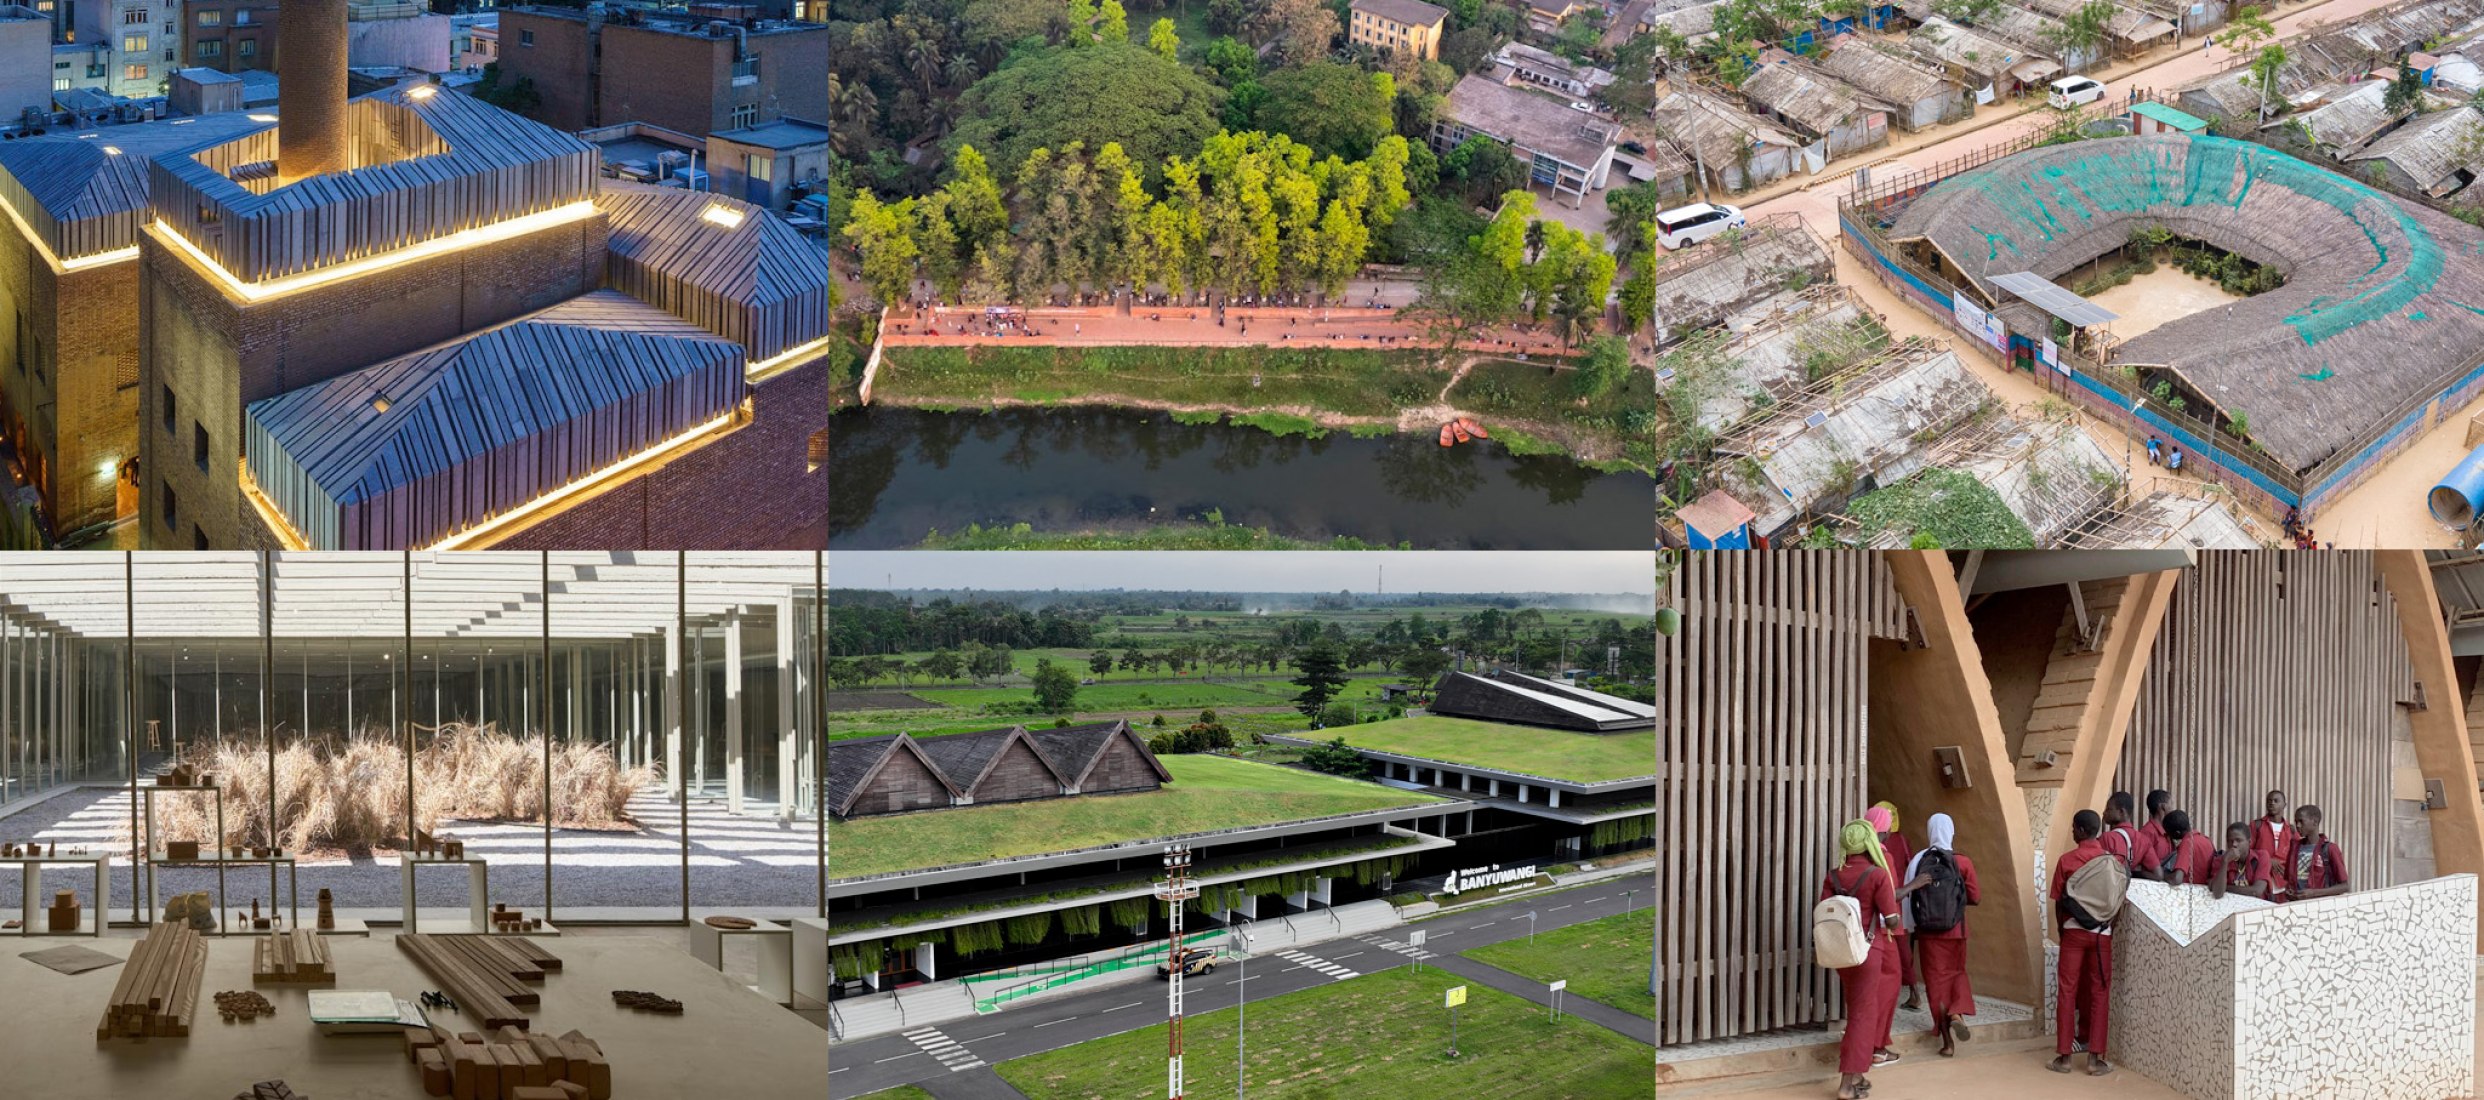 Six great winners of the 2022 Aga Khan Award for Architecture.